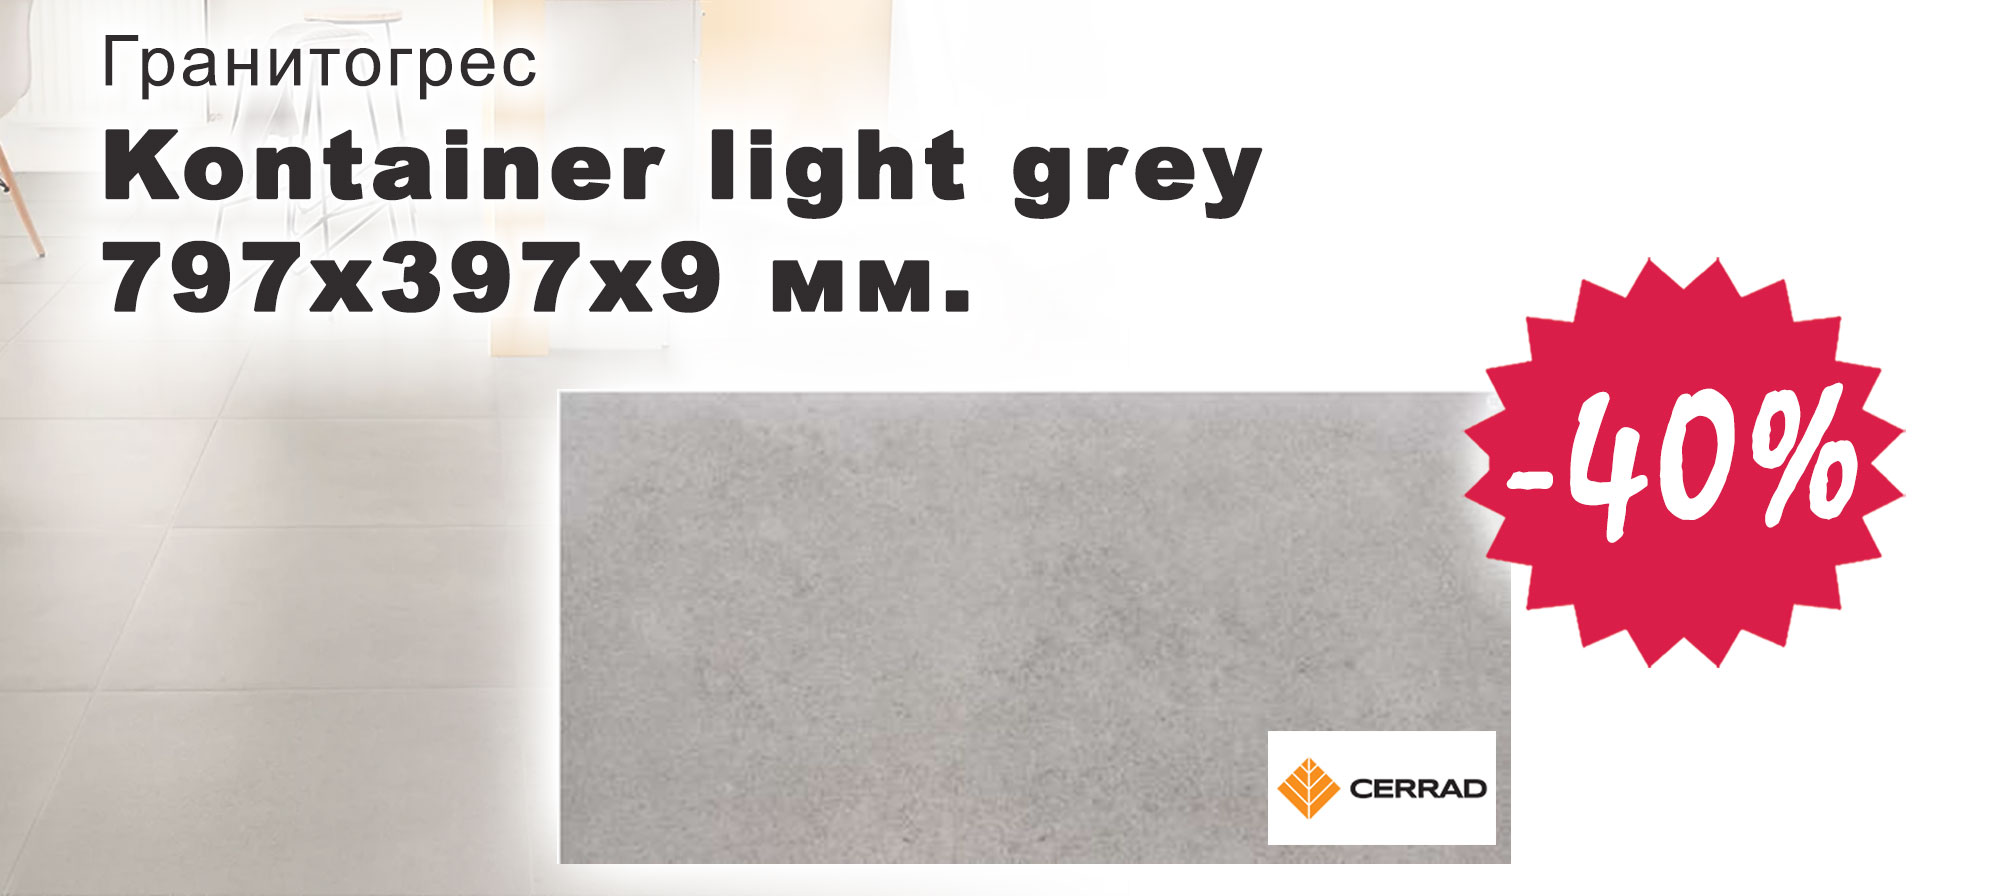 Granite tiles Kontainer light gray with a 40% discount